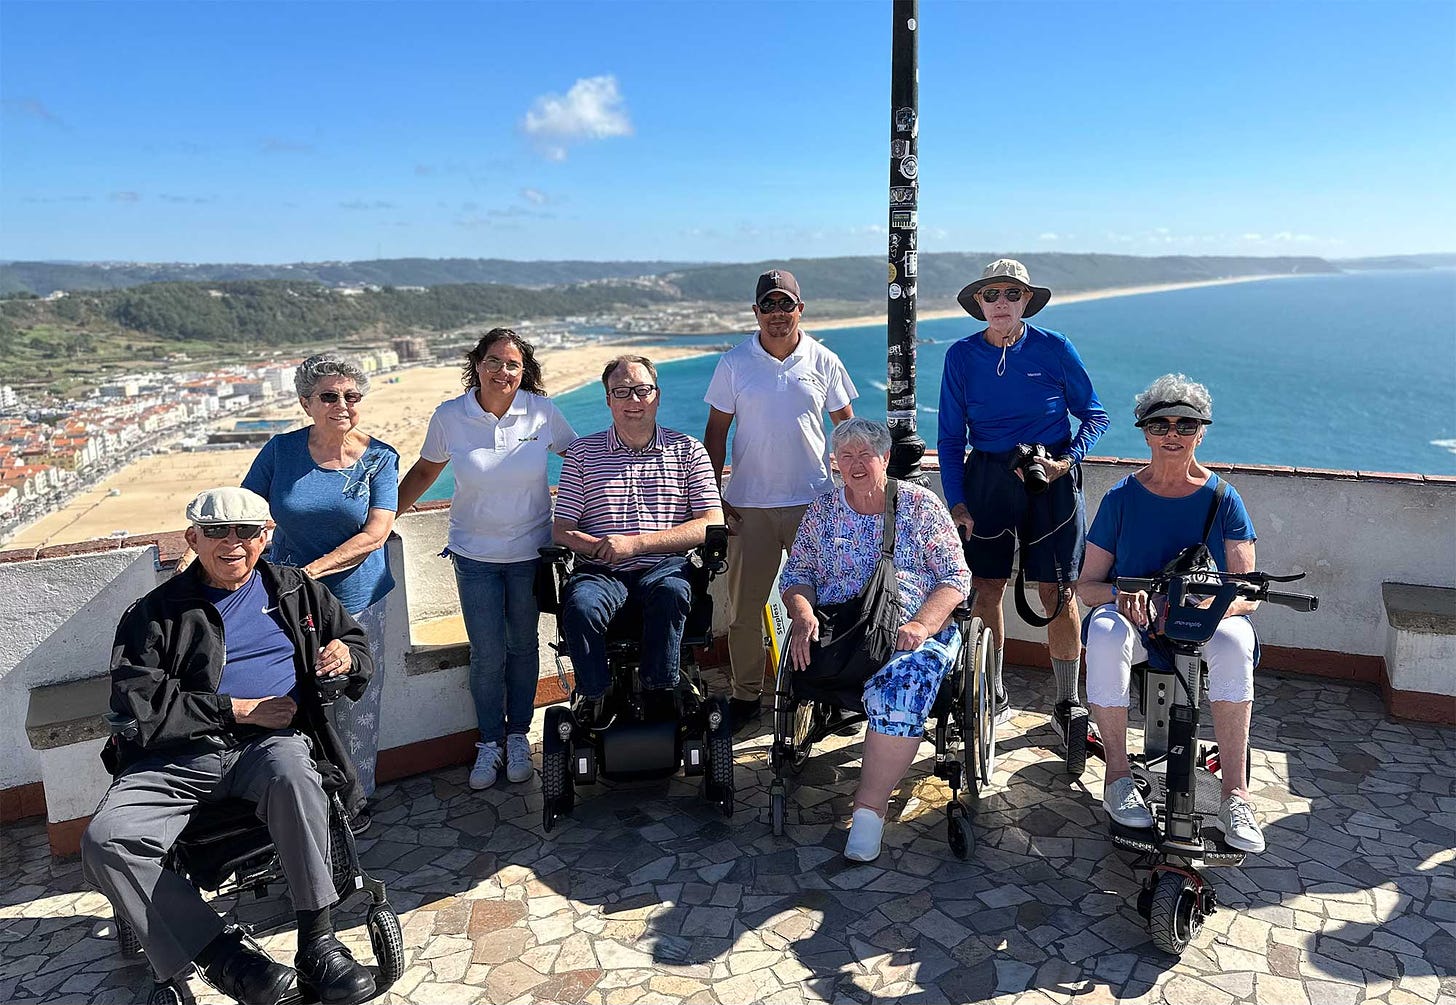 John with a group of travelers overlooking a Portuguese beach town.